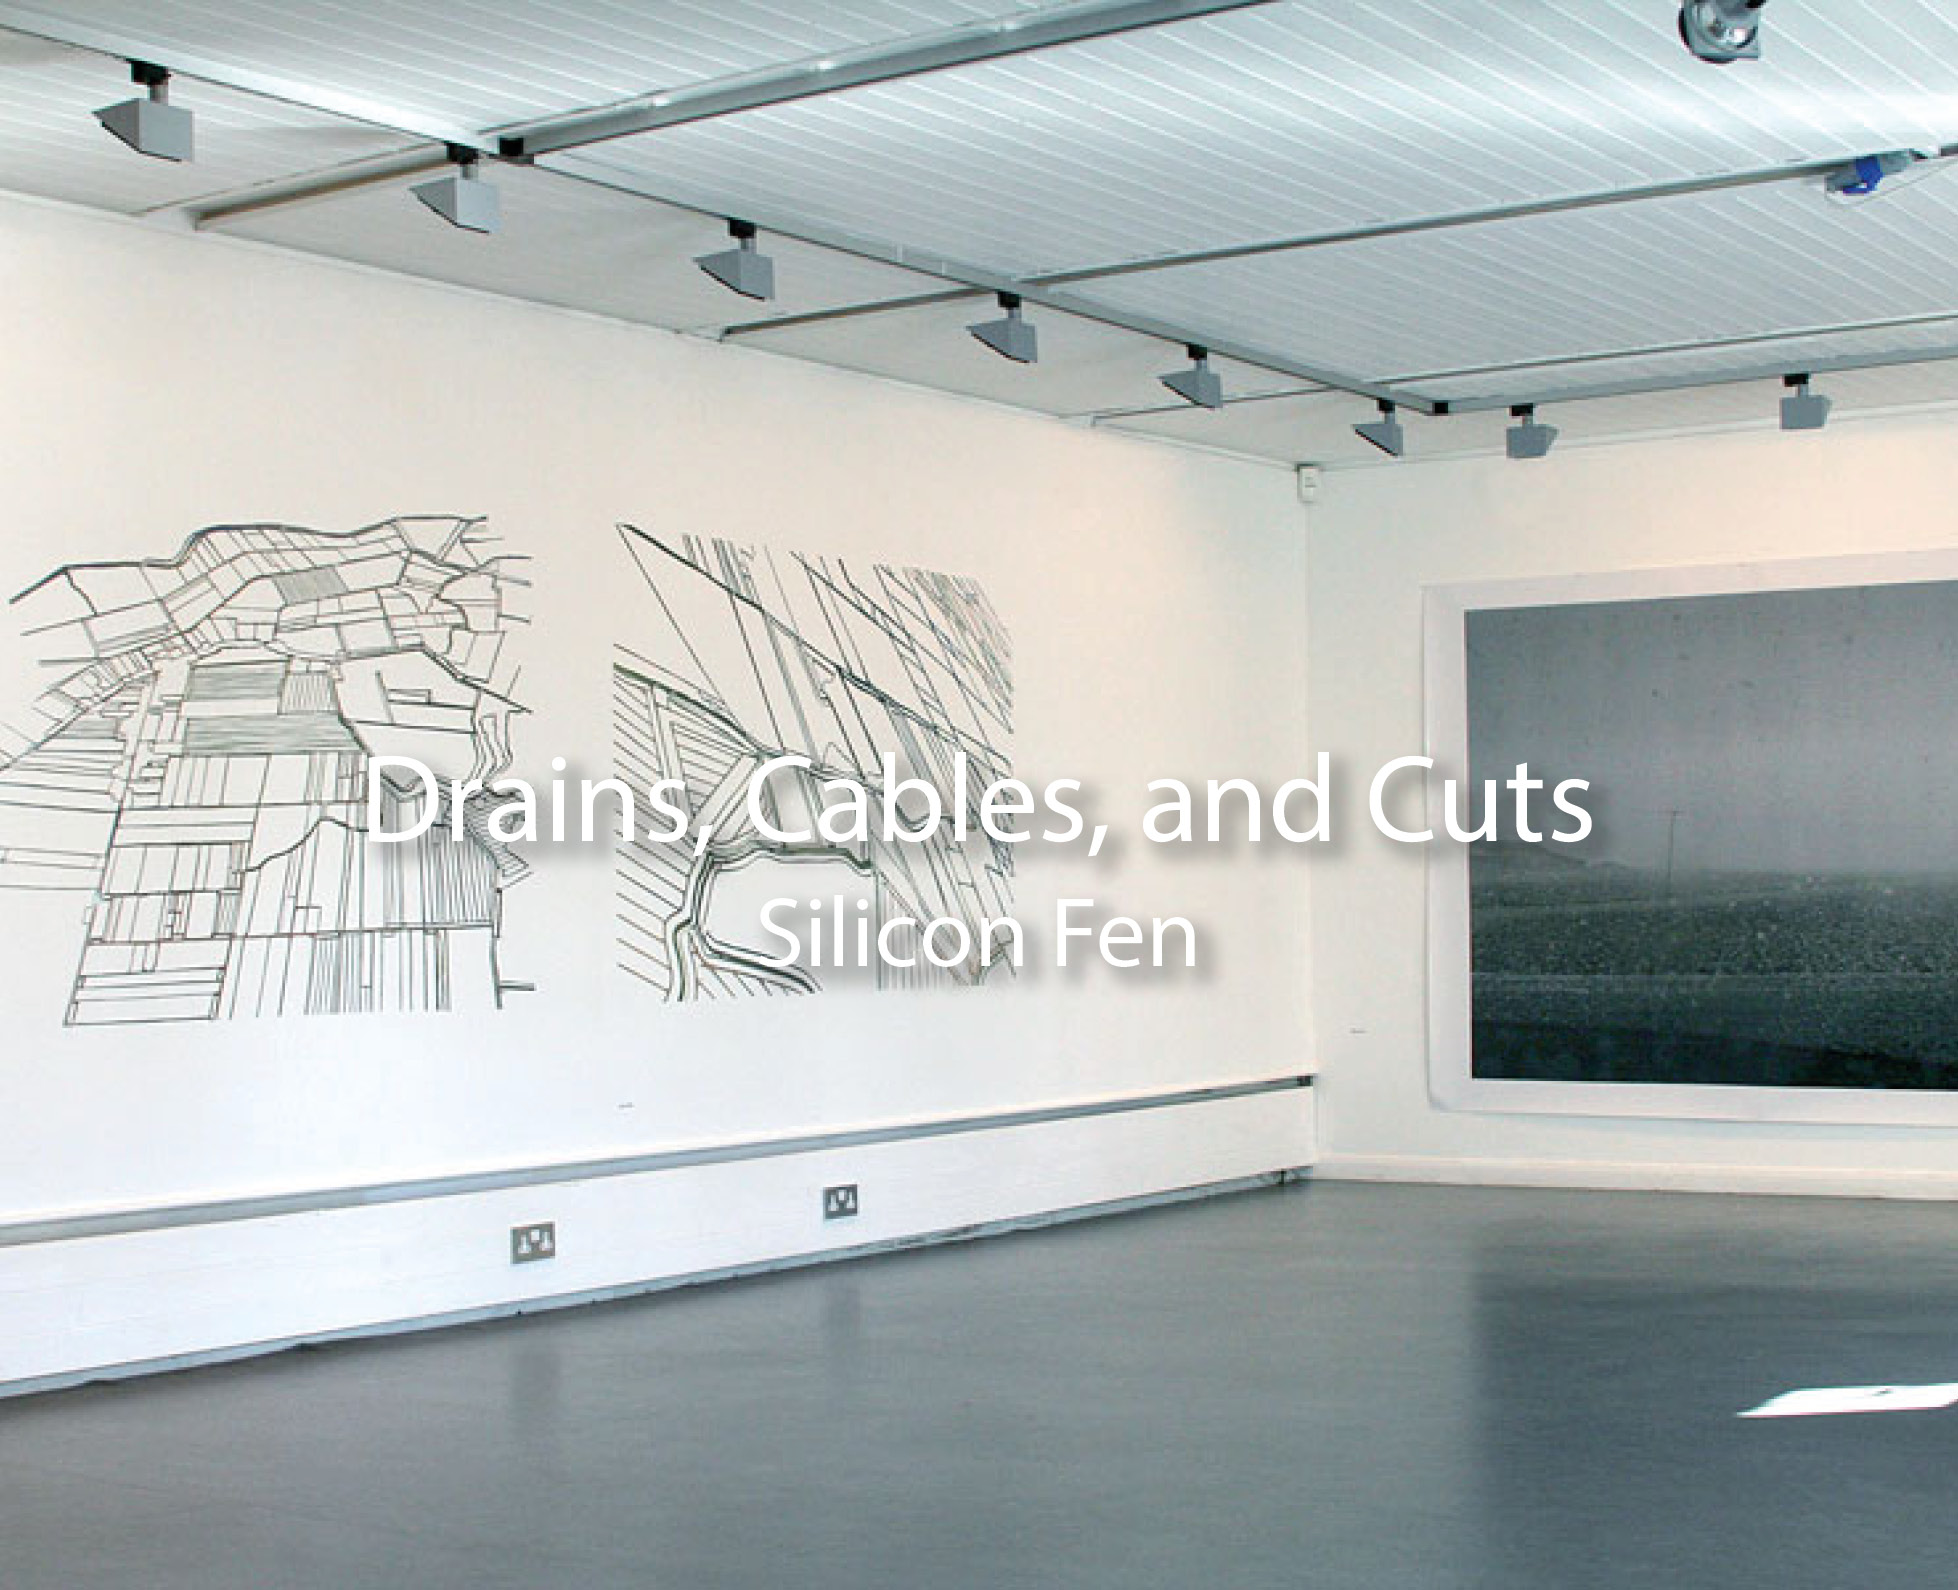 DRAINS, CABLES, and CUTS